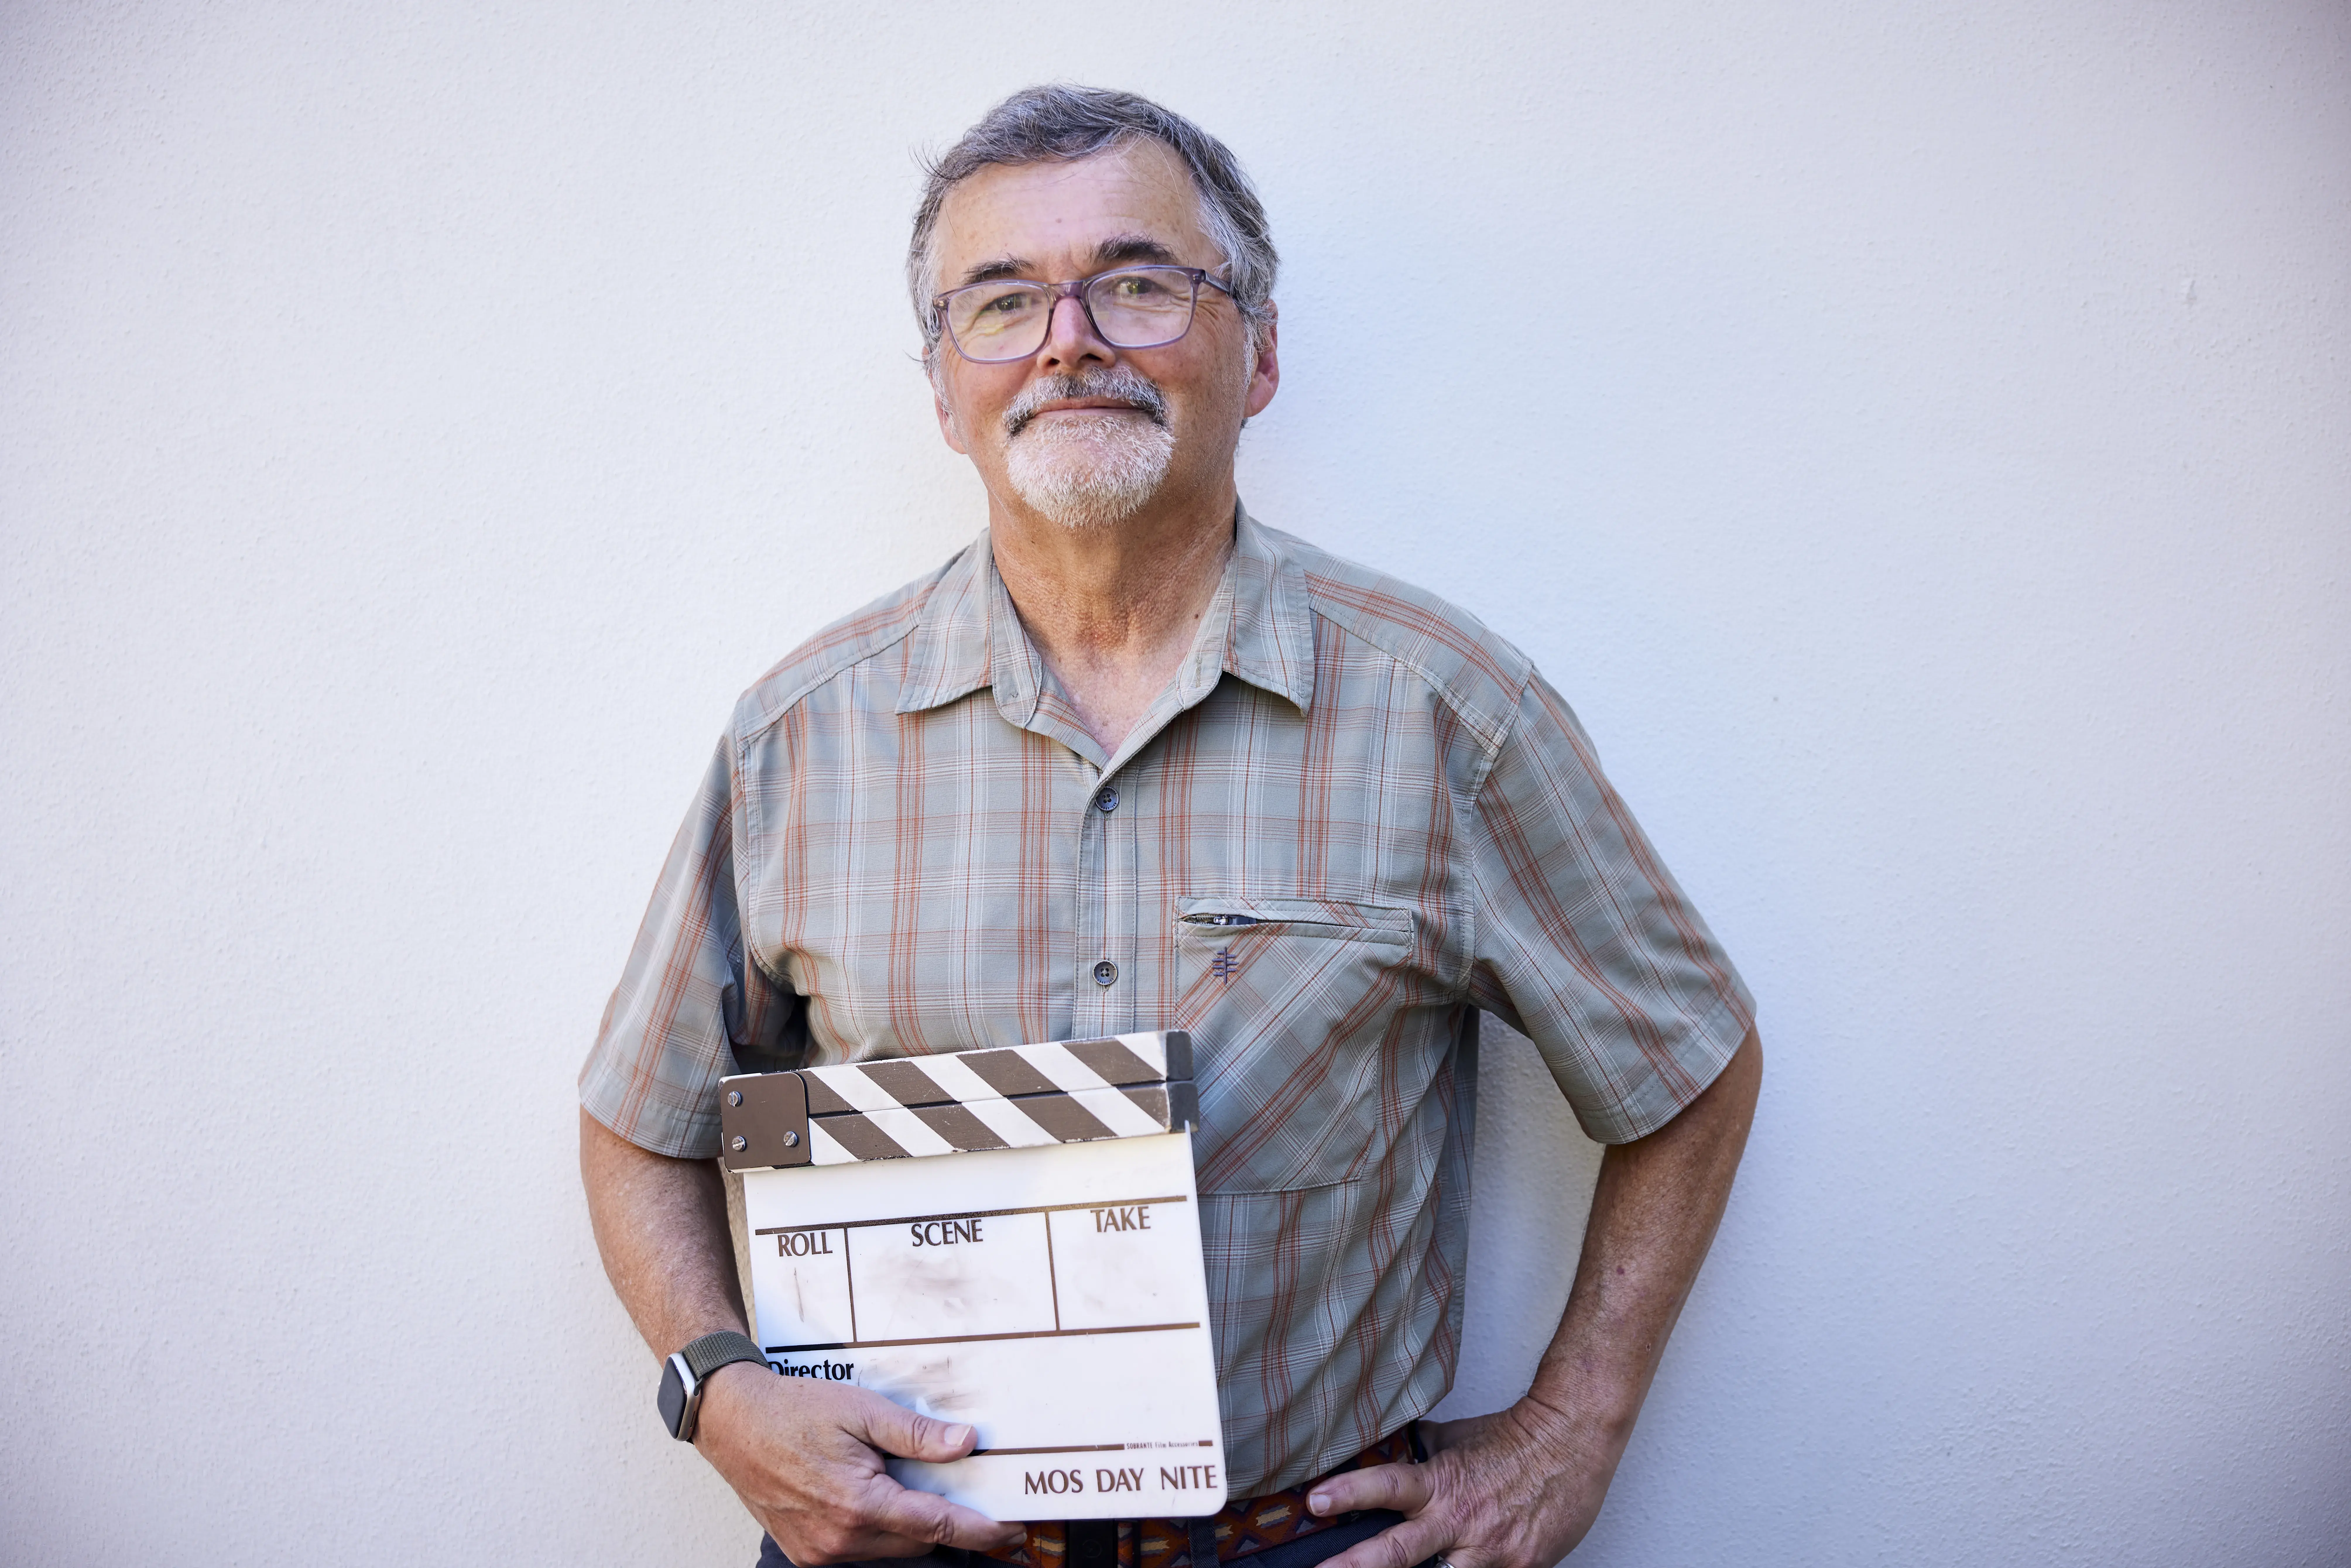 Jim Gilmore holding a clapperboard